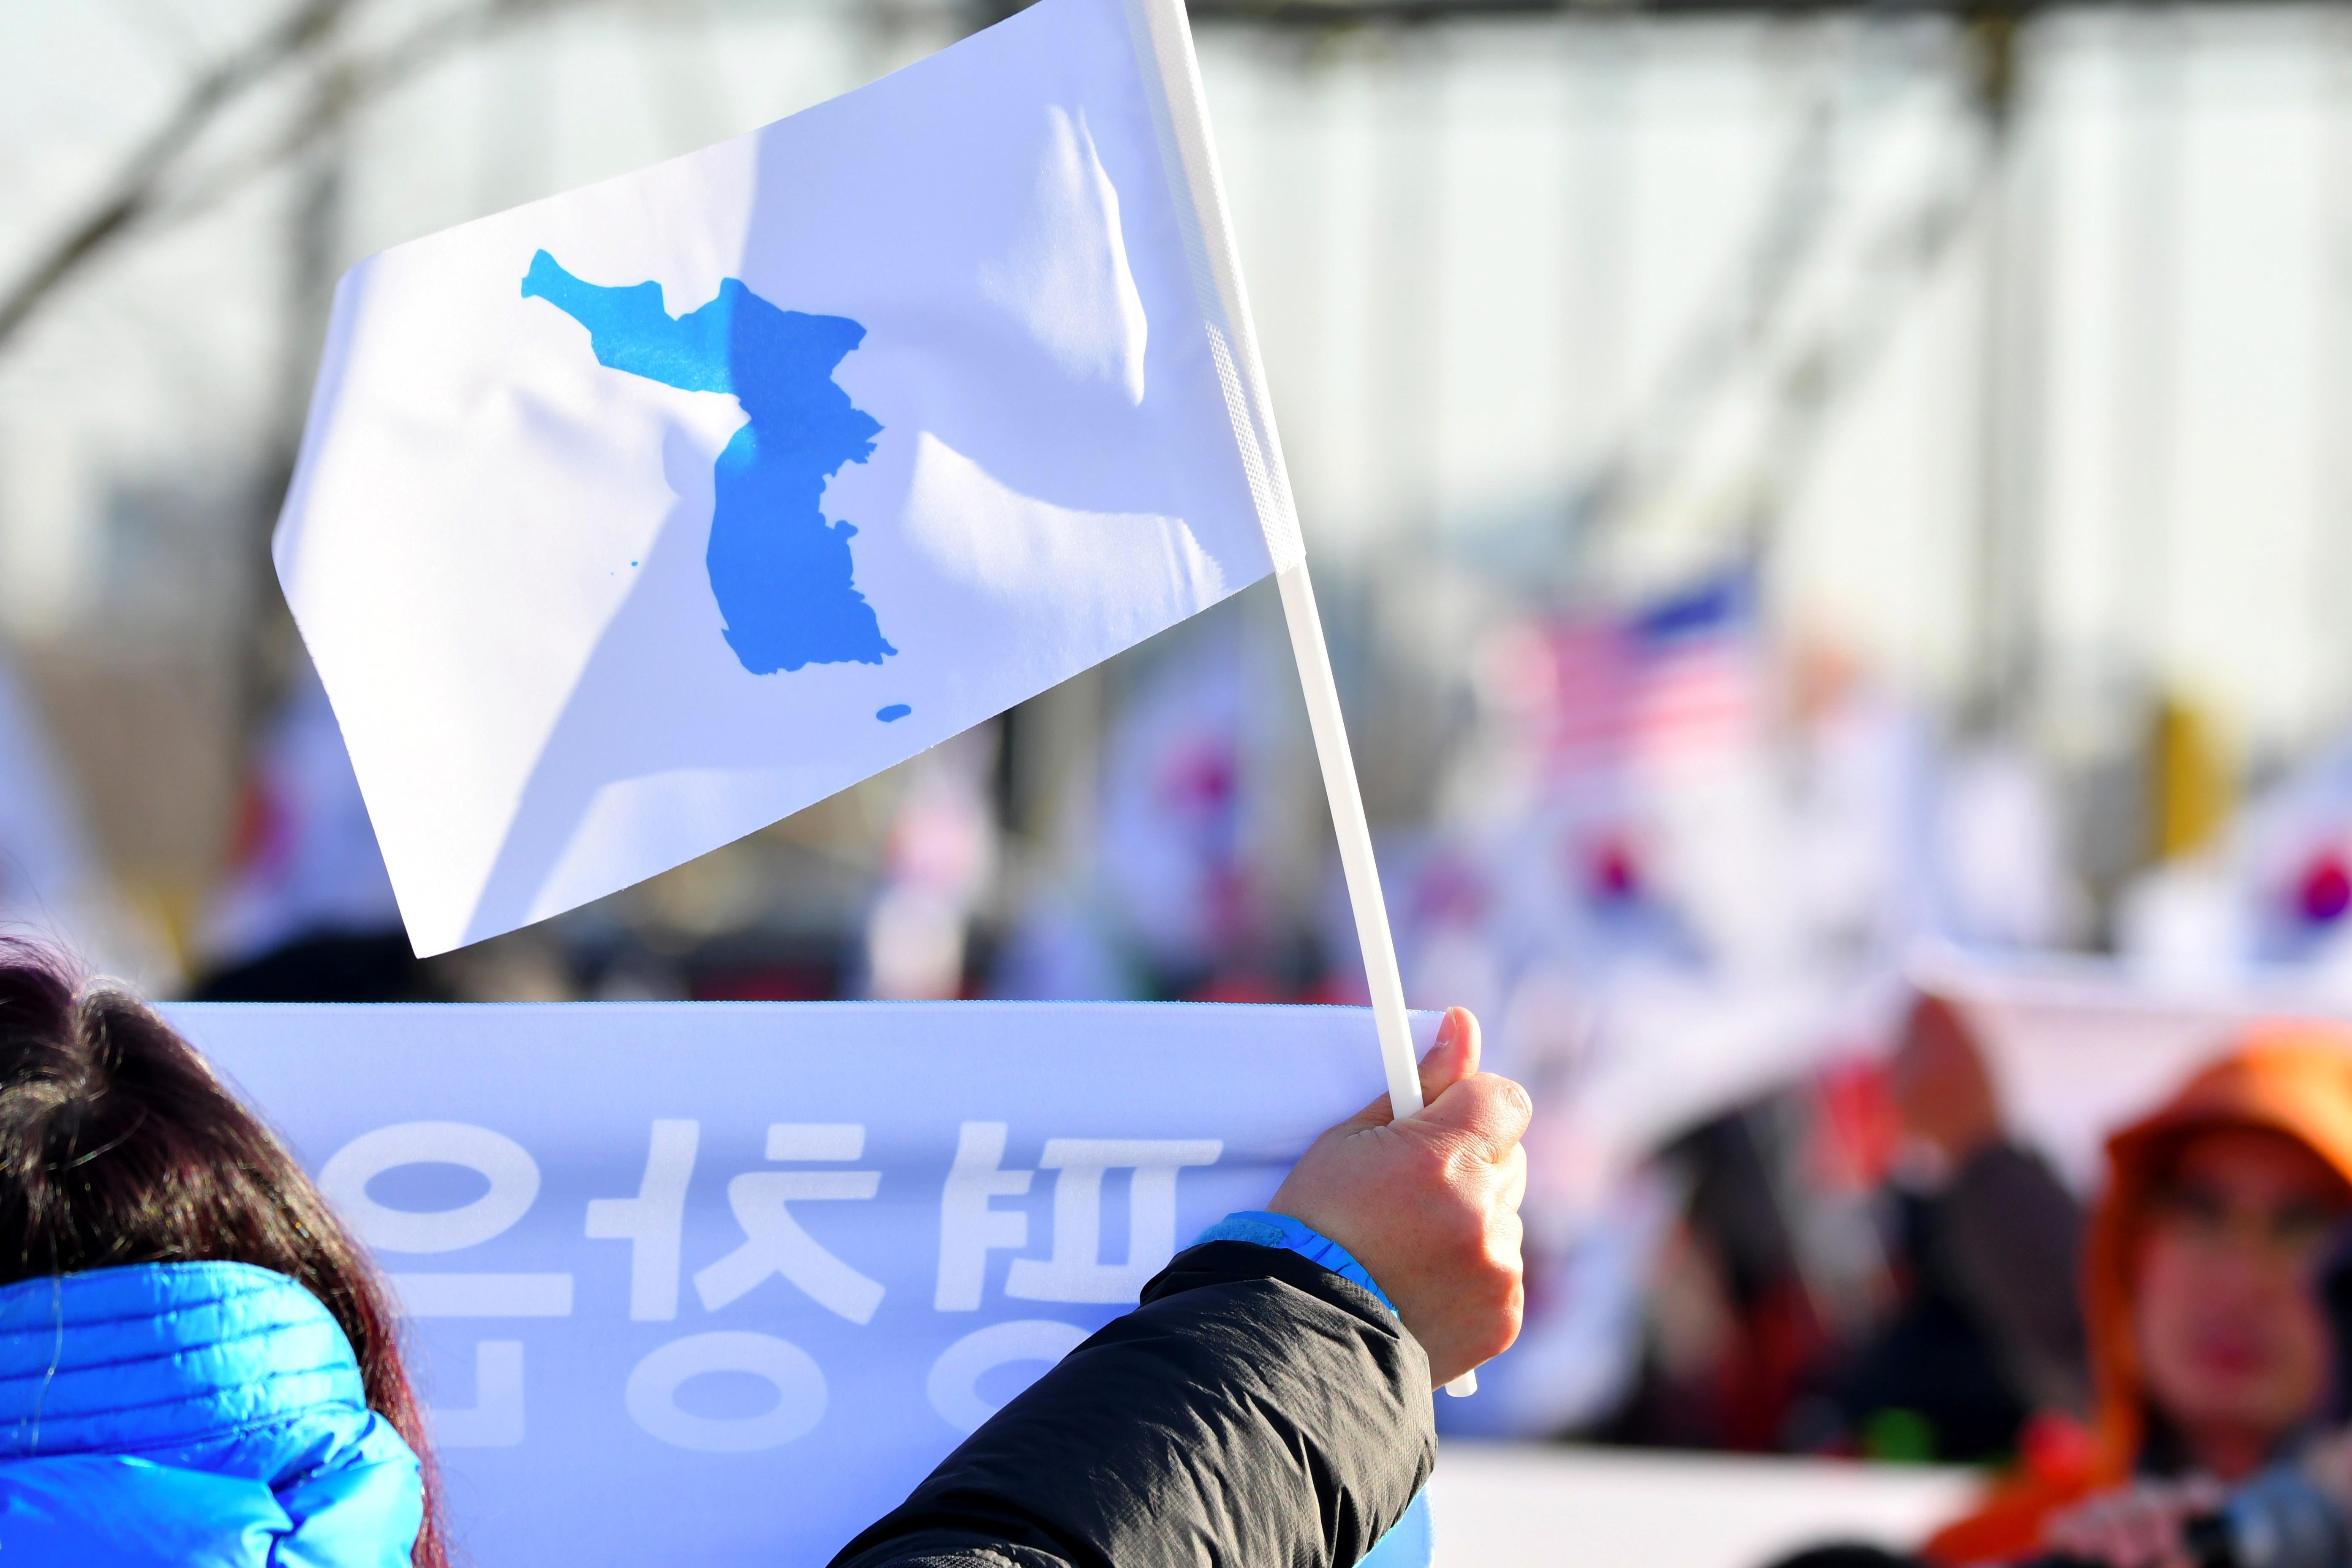 A South Korean supporter of the unified Korea female ice hockey team wave a 'Unification flag' toward people protesting against the team, outside an ice rink before a friendly ice hockey match between the combined team and Sweden, in the western city of Incheon on February 4, 2018 ahead of the Pyeongchang 2018 Winter Olympic Games. / AFP PHOTO / KIM DOO-HO        (Photo credit should read KIM DOO-HO/AFP/Getty Images)